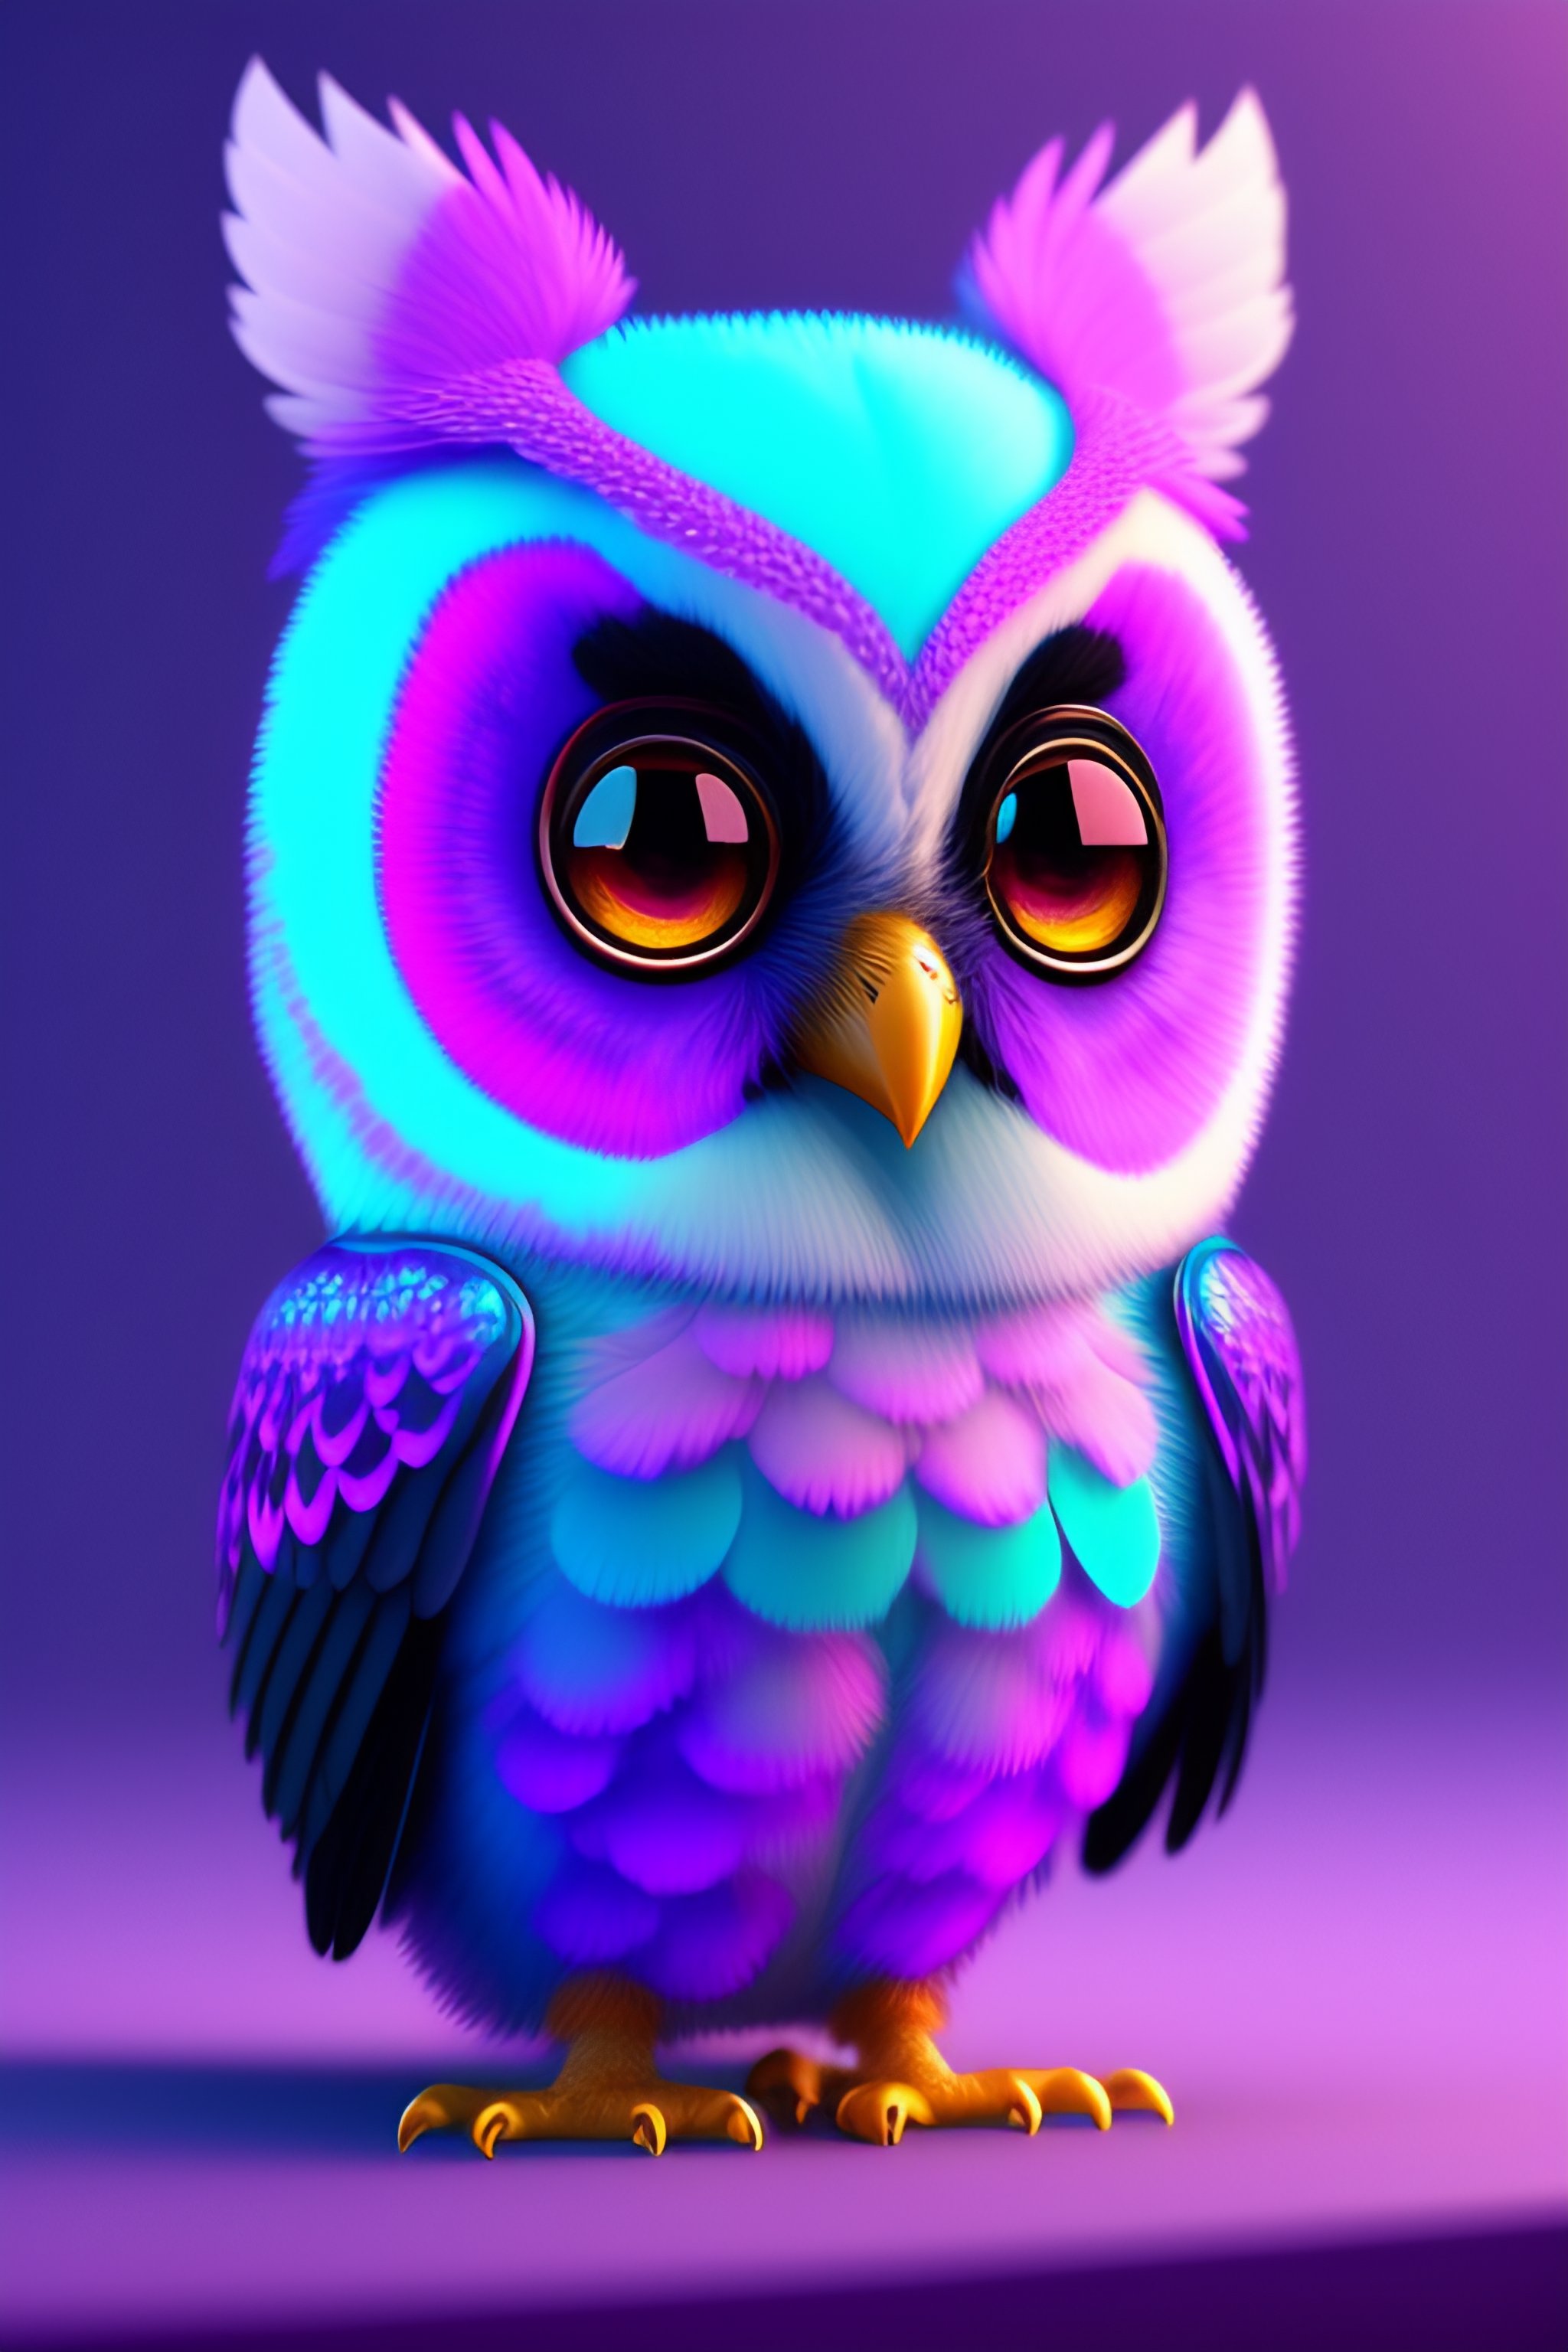 Lexica - A cute adorable baby owl made of purple pink and turquoise crystal  with low poly eye's highly detailed intricated concept art trending artst...